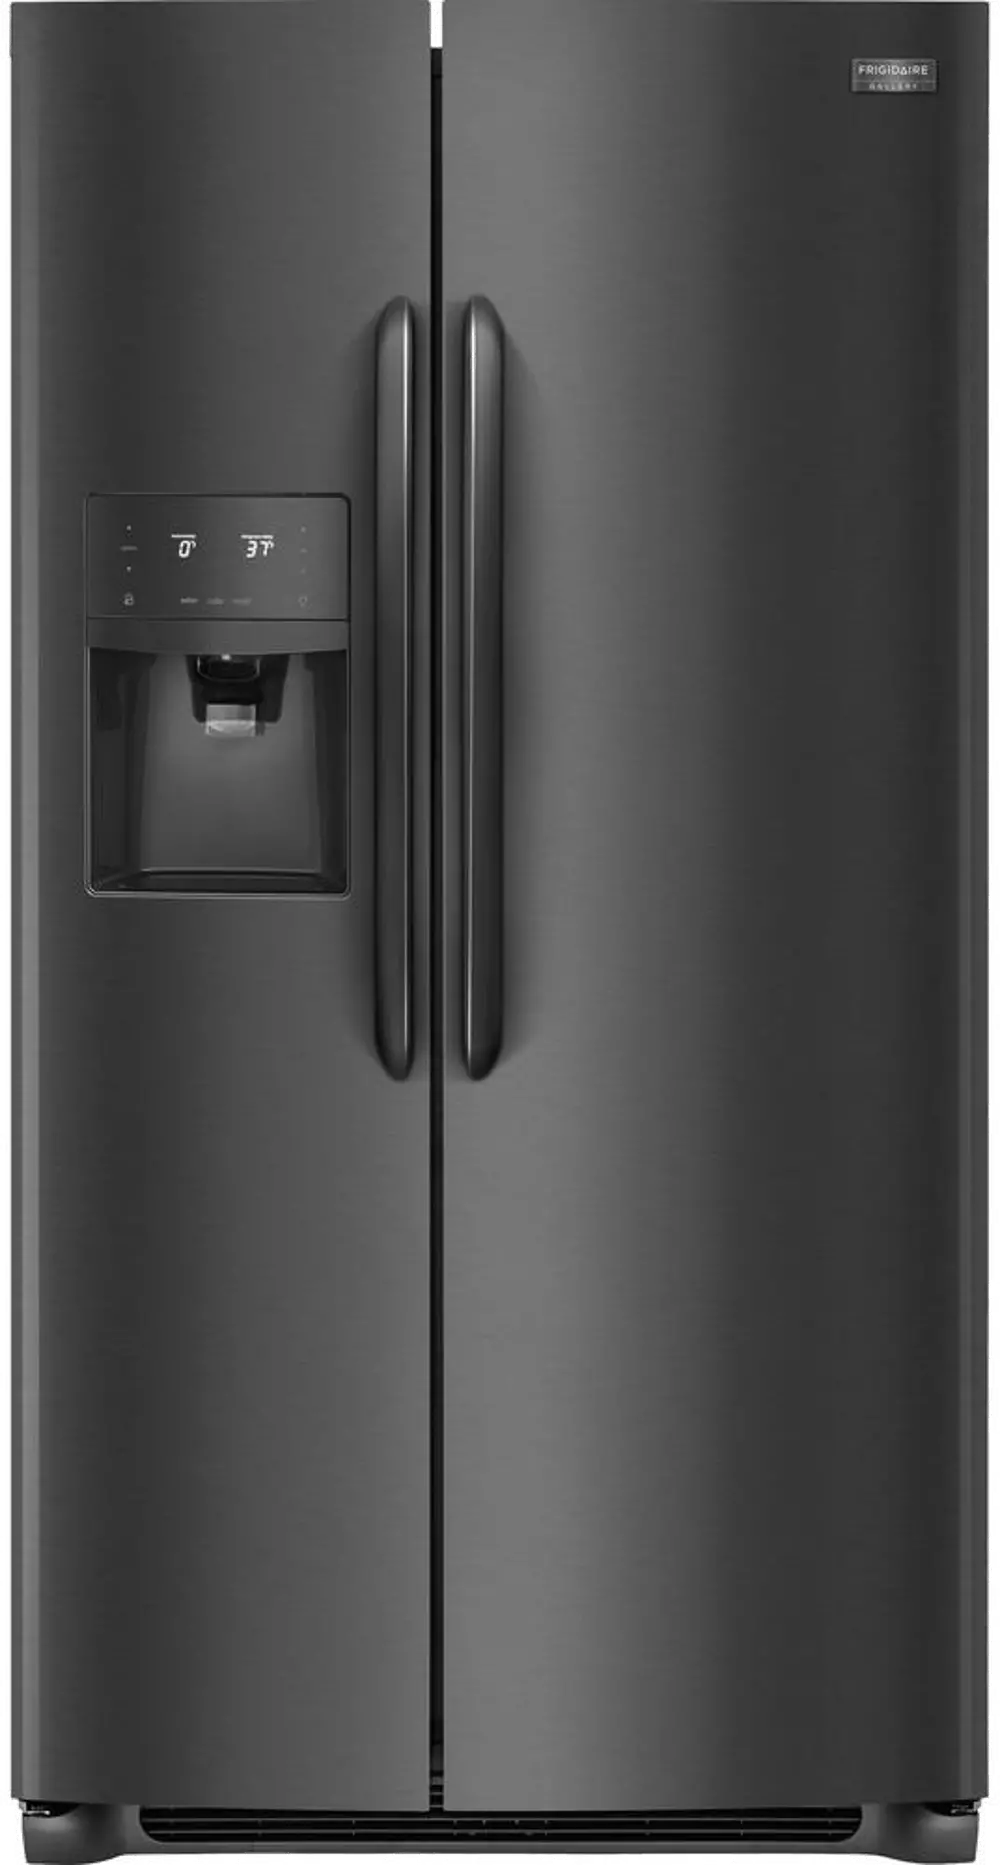 FGSC2335TD Frigidaire Gallery Counter Depth Side by Side Refrigerator - 22.1 cu. ft., 36 Inch Black Stainless Steel-1